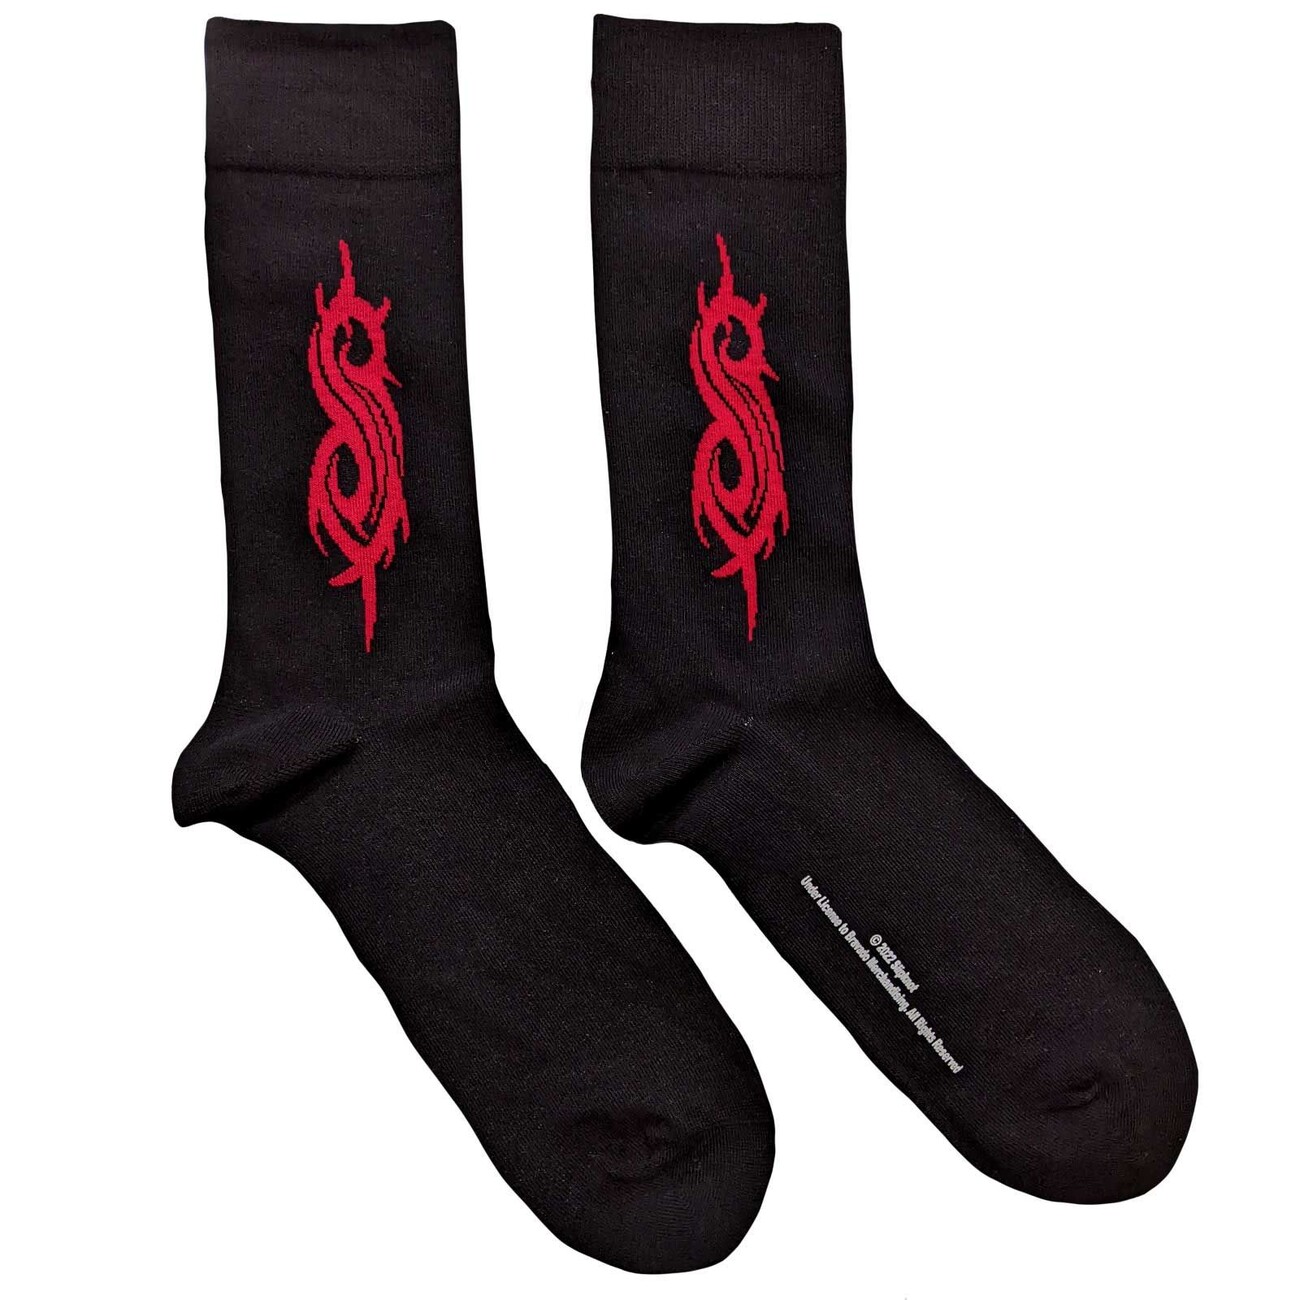 Socks - | Clothes and accessories for fans